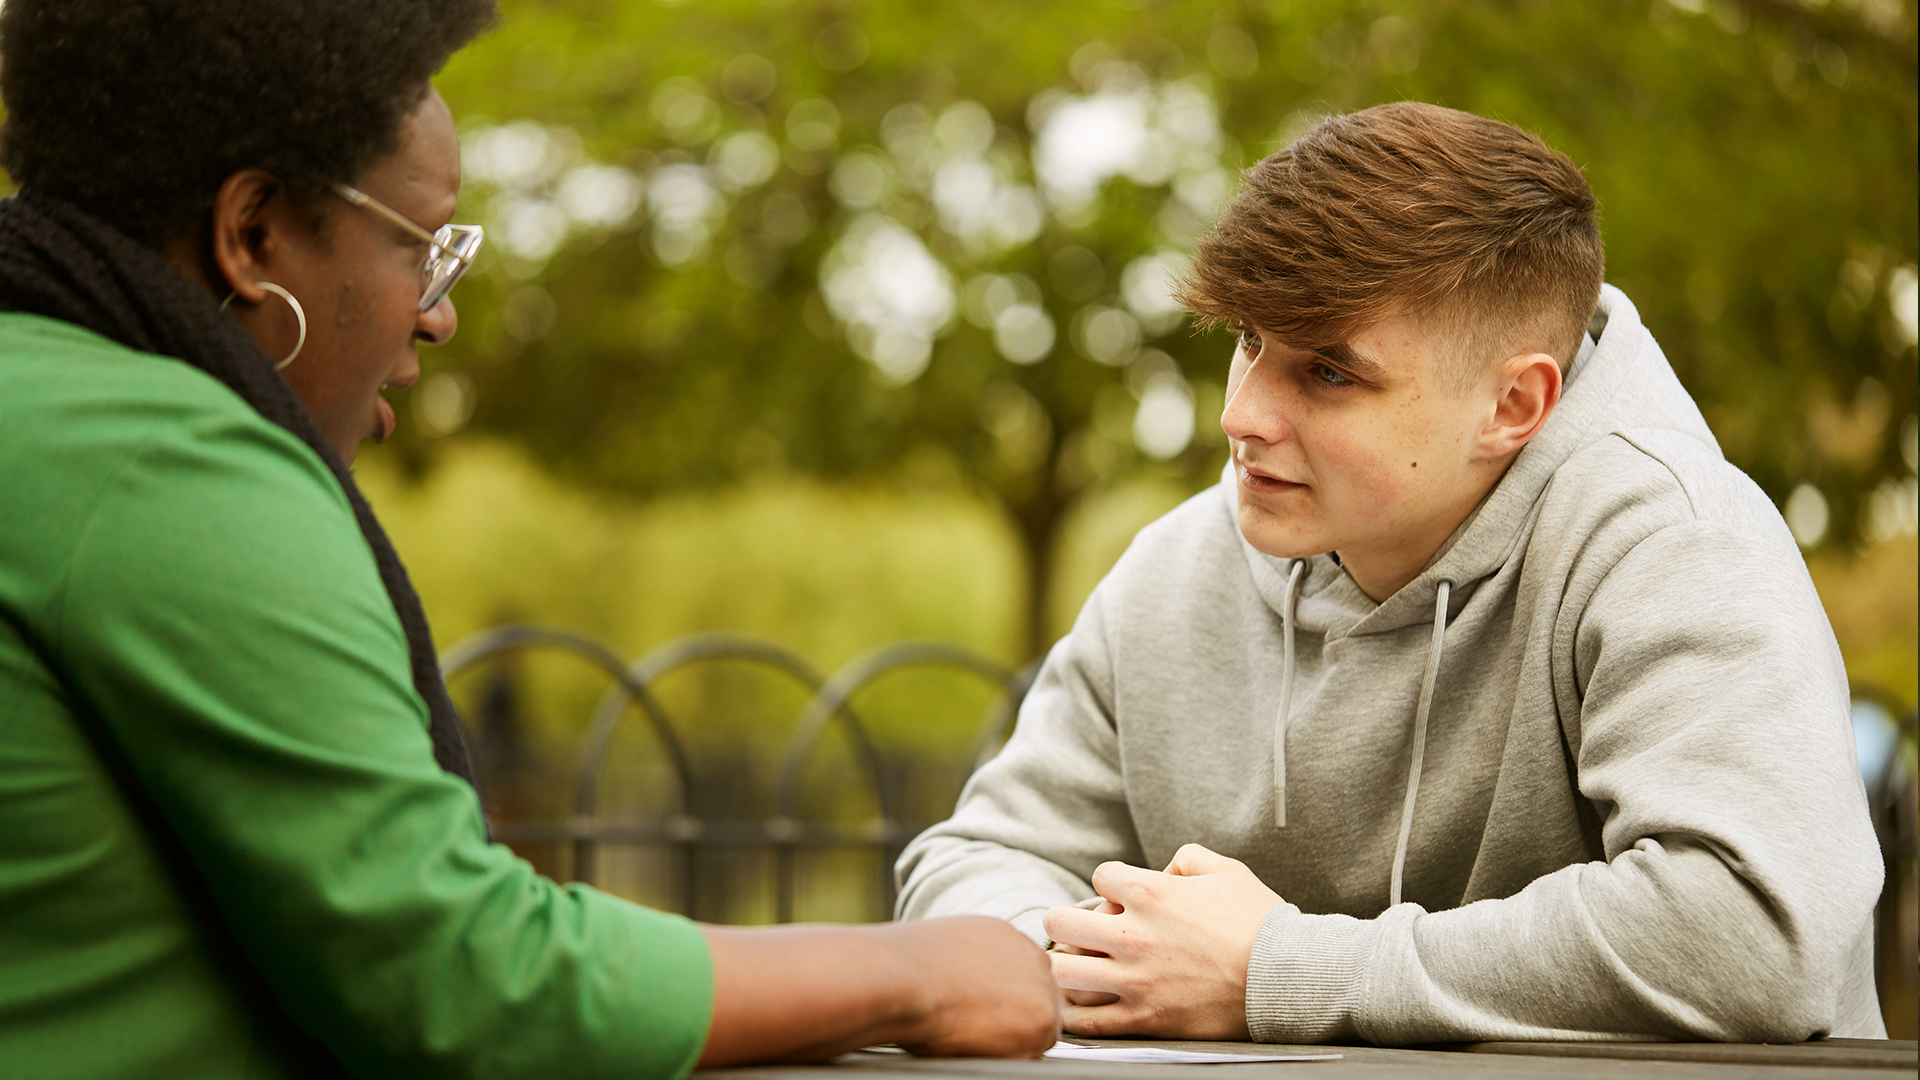 A young person talking to a trusted adult outside on a bench.